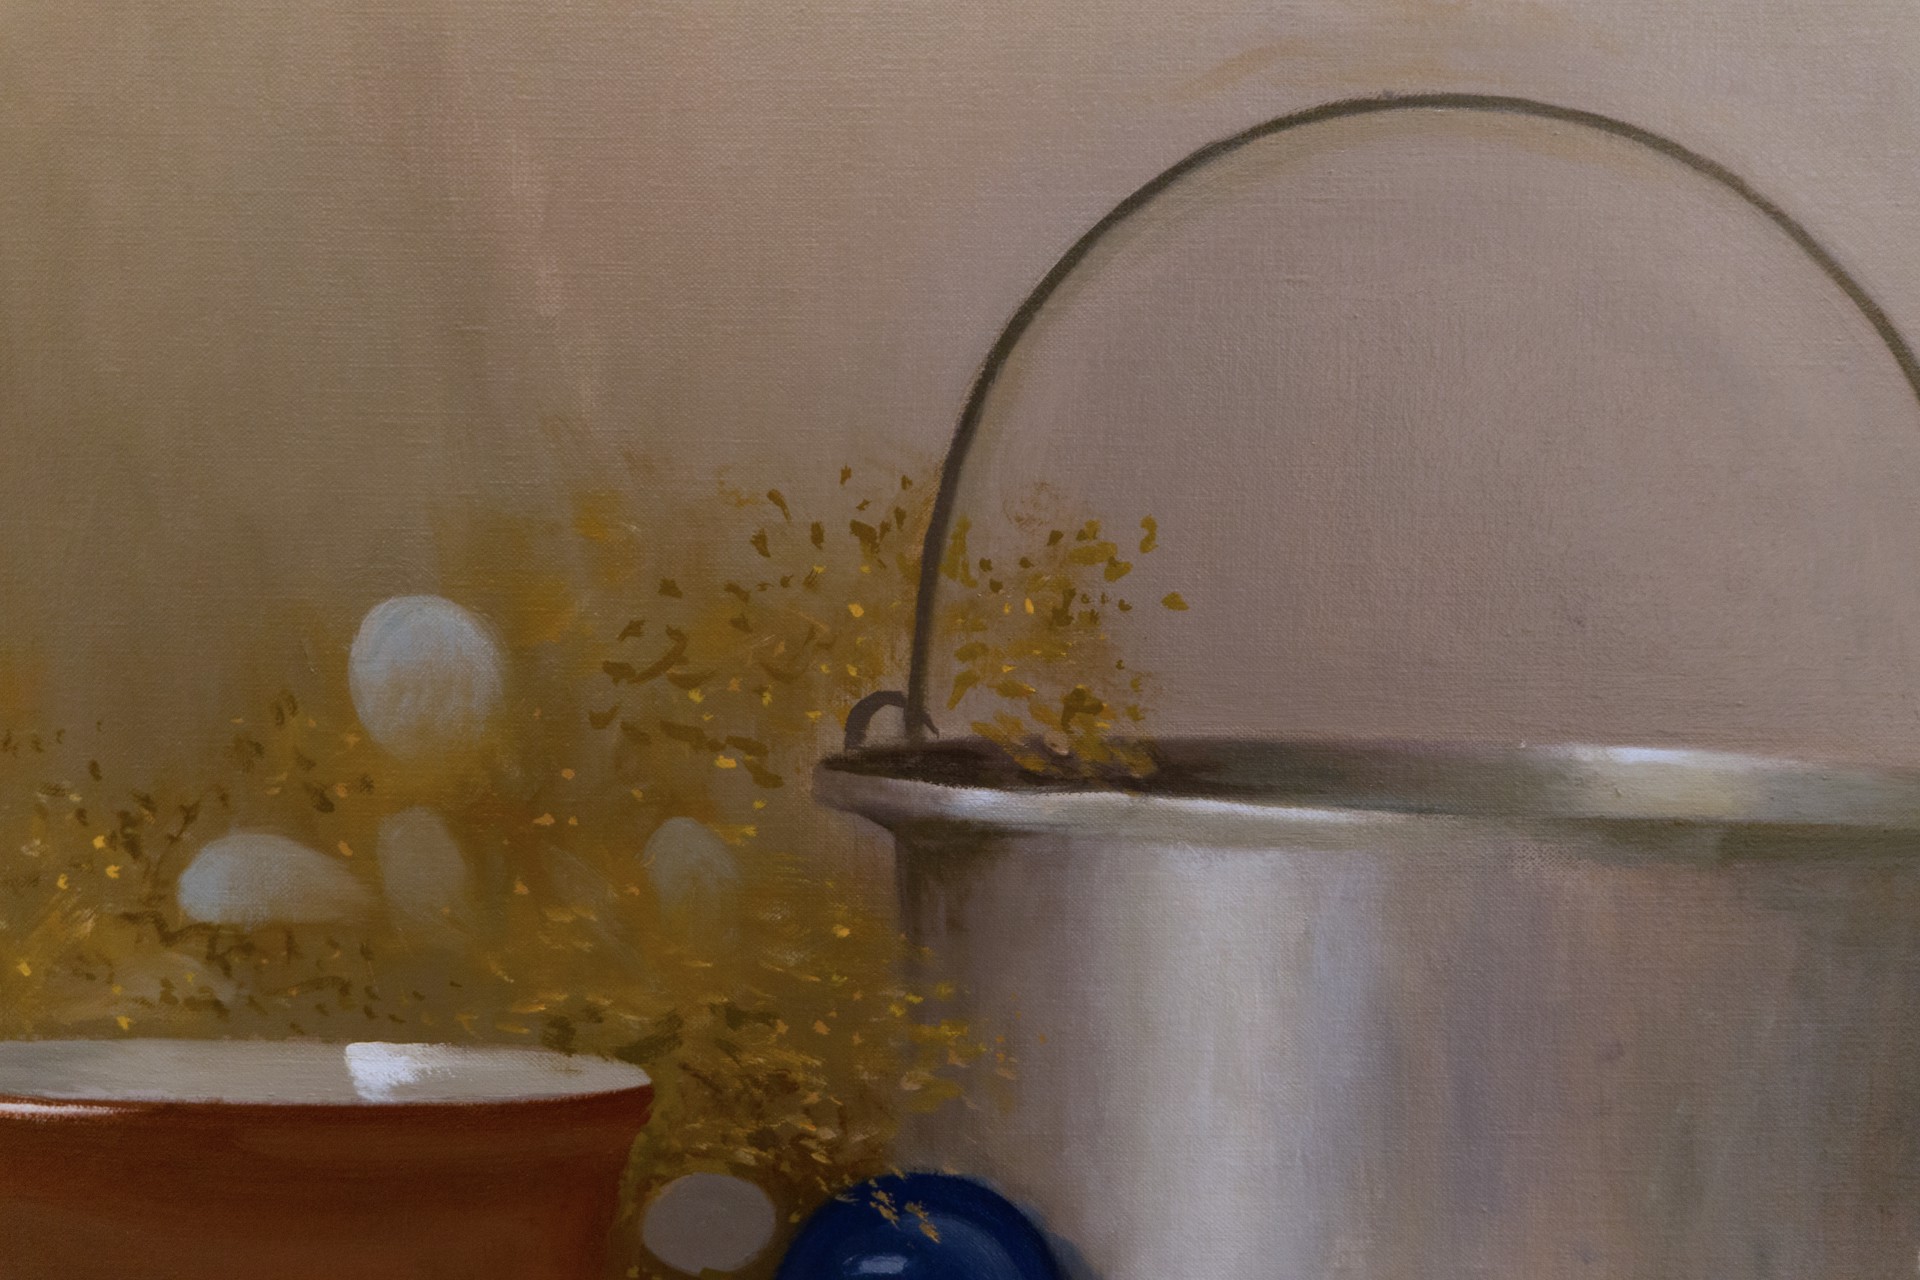 Still Life with Aluminum Cooking Kettle by Robert Douglas Hunter